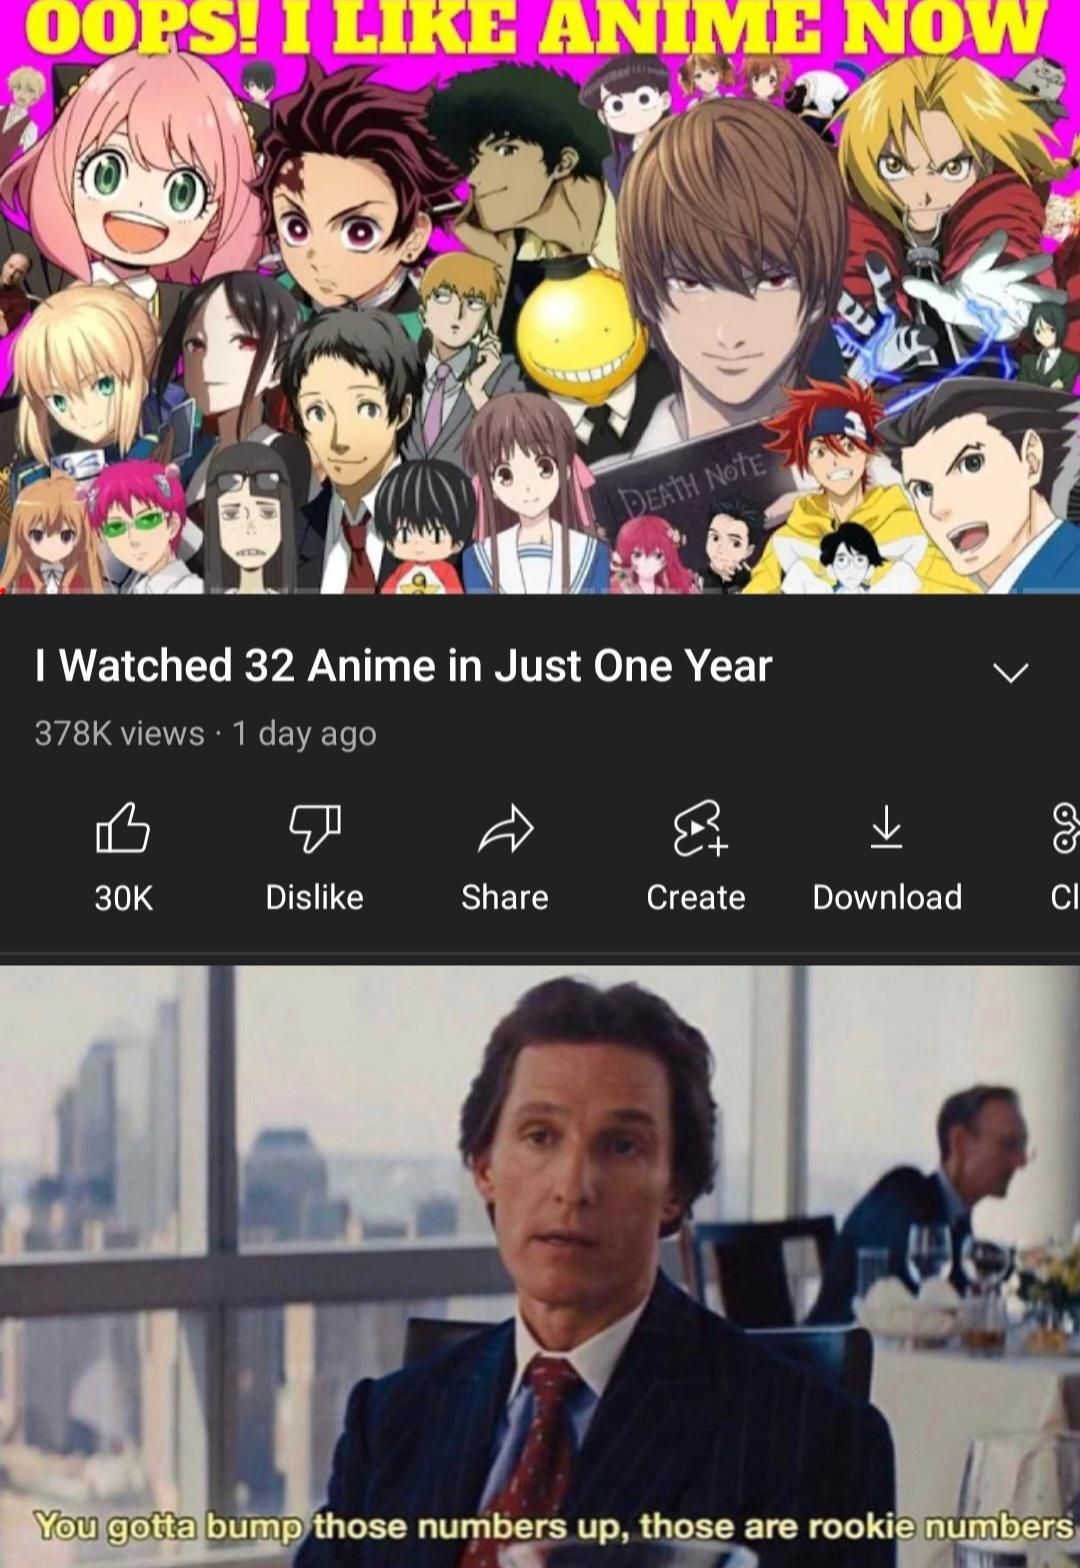 I haven't watched anime in months to be fair